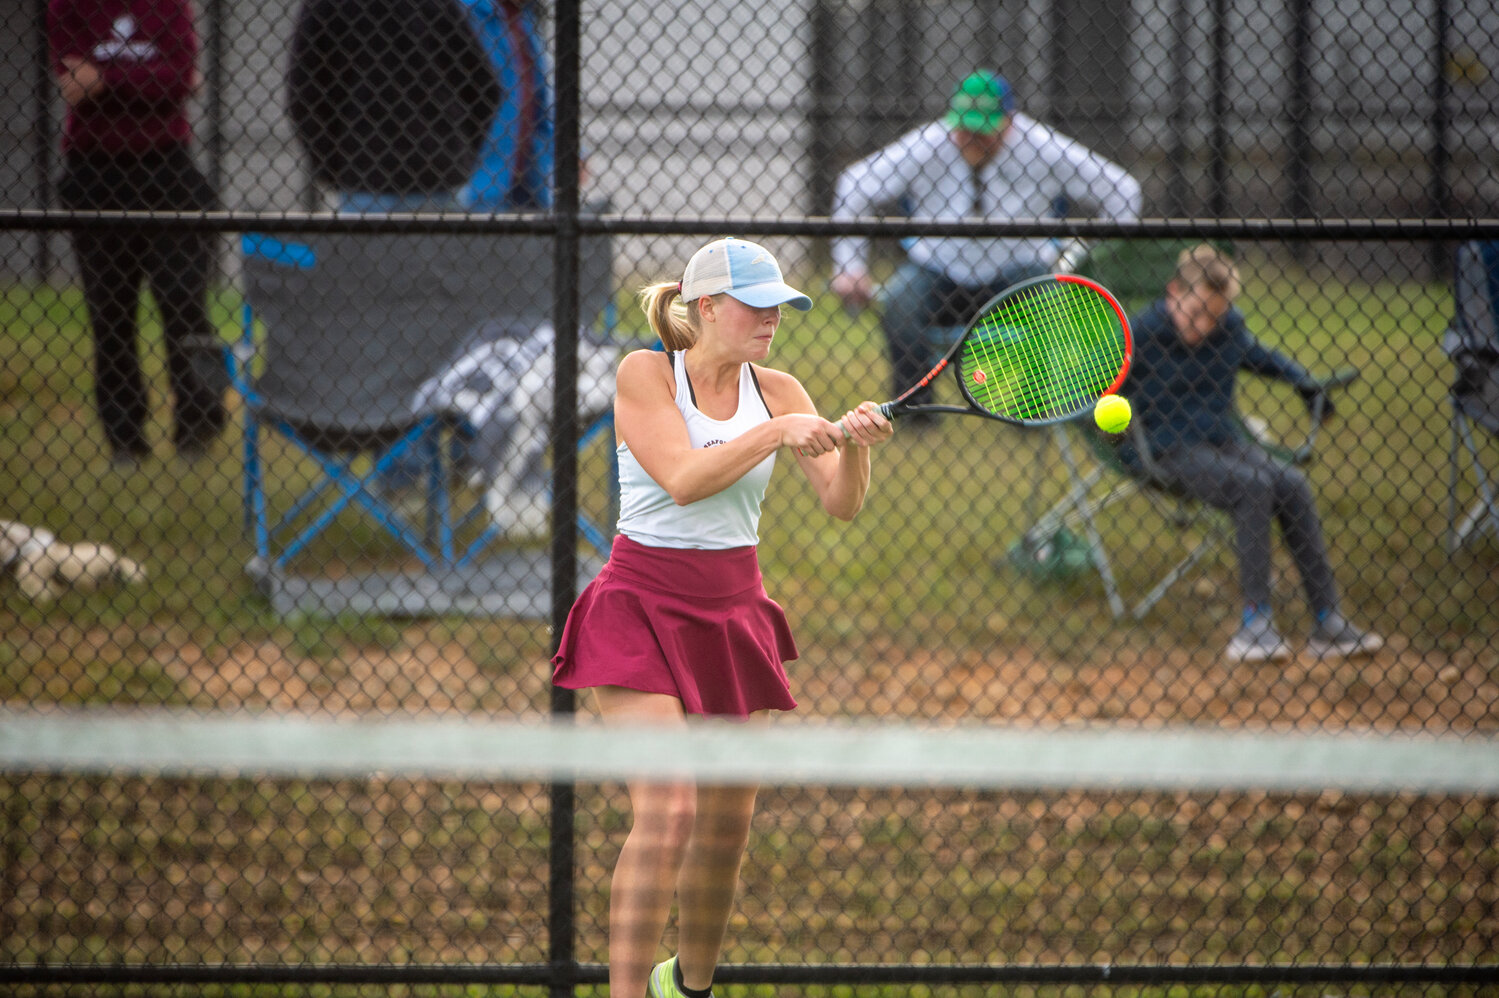 Seaforth’s Evelyn Atkins won the Mid-Carolina 2A tournament singles bracket and will advance to regionals.